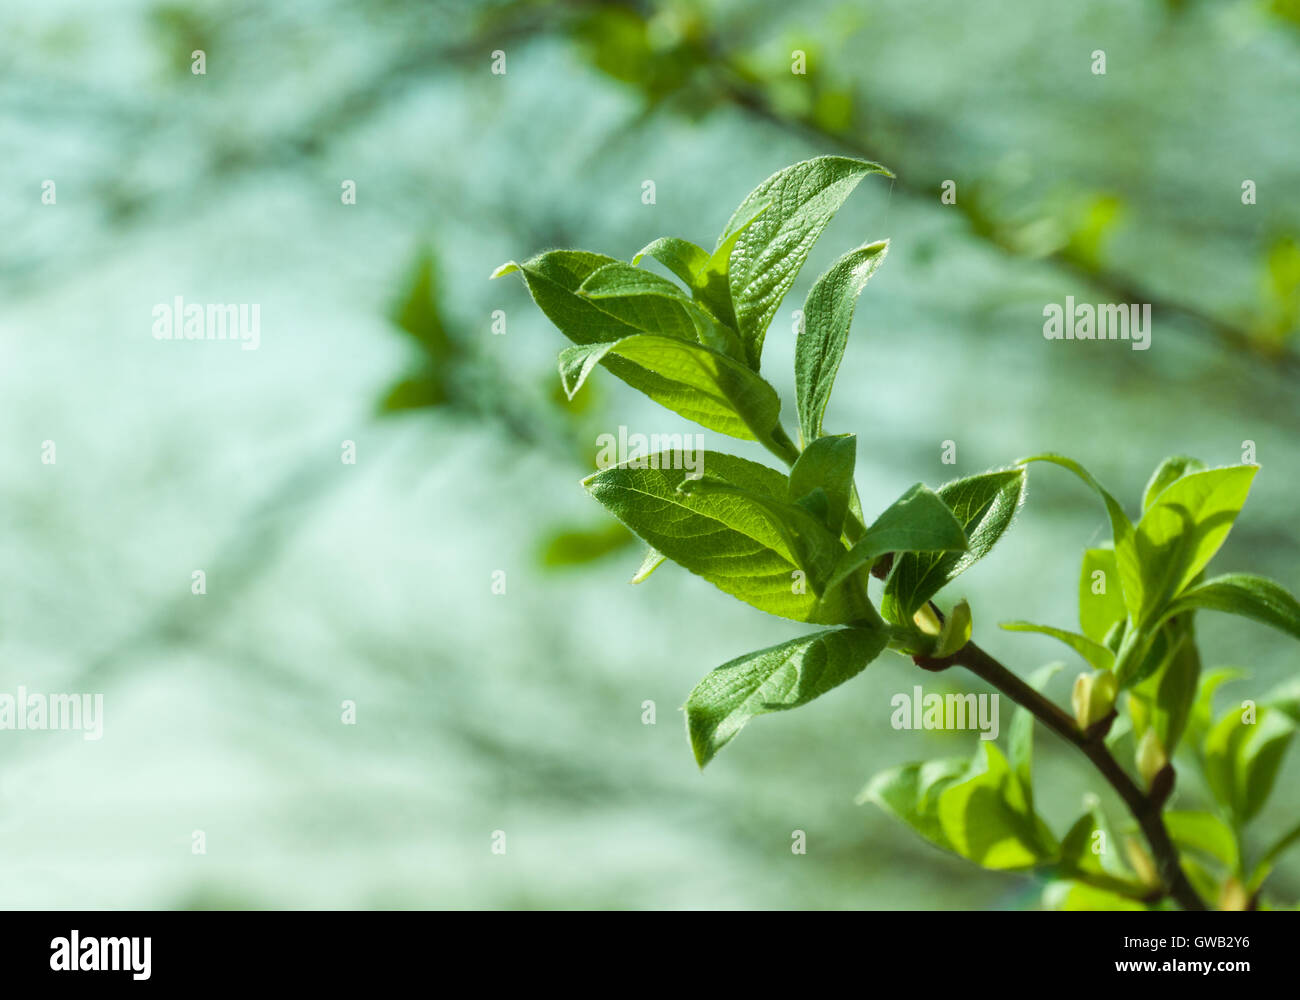 Natural seasonal spring eco backgrond: pattern of tree branch with young green foliage with defocused green forest backdrop. Stock Photo